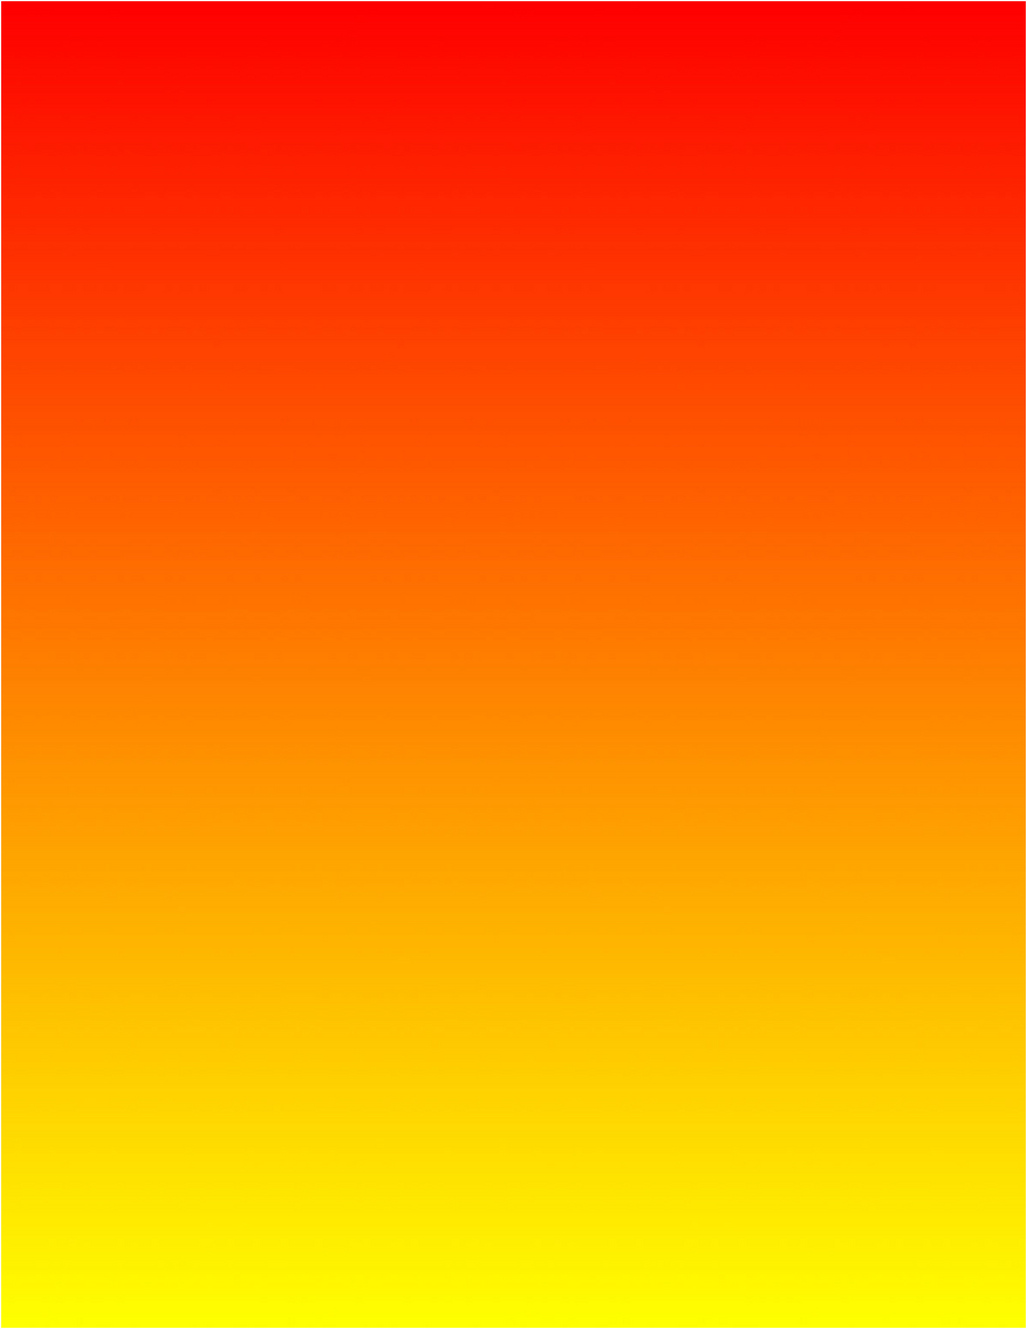 Red Yellow Background Images  Free Download on Freepik